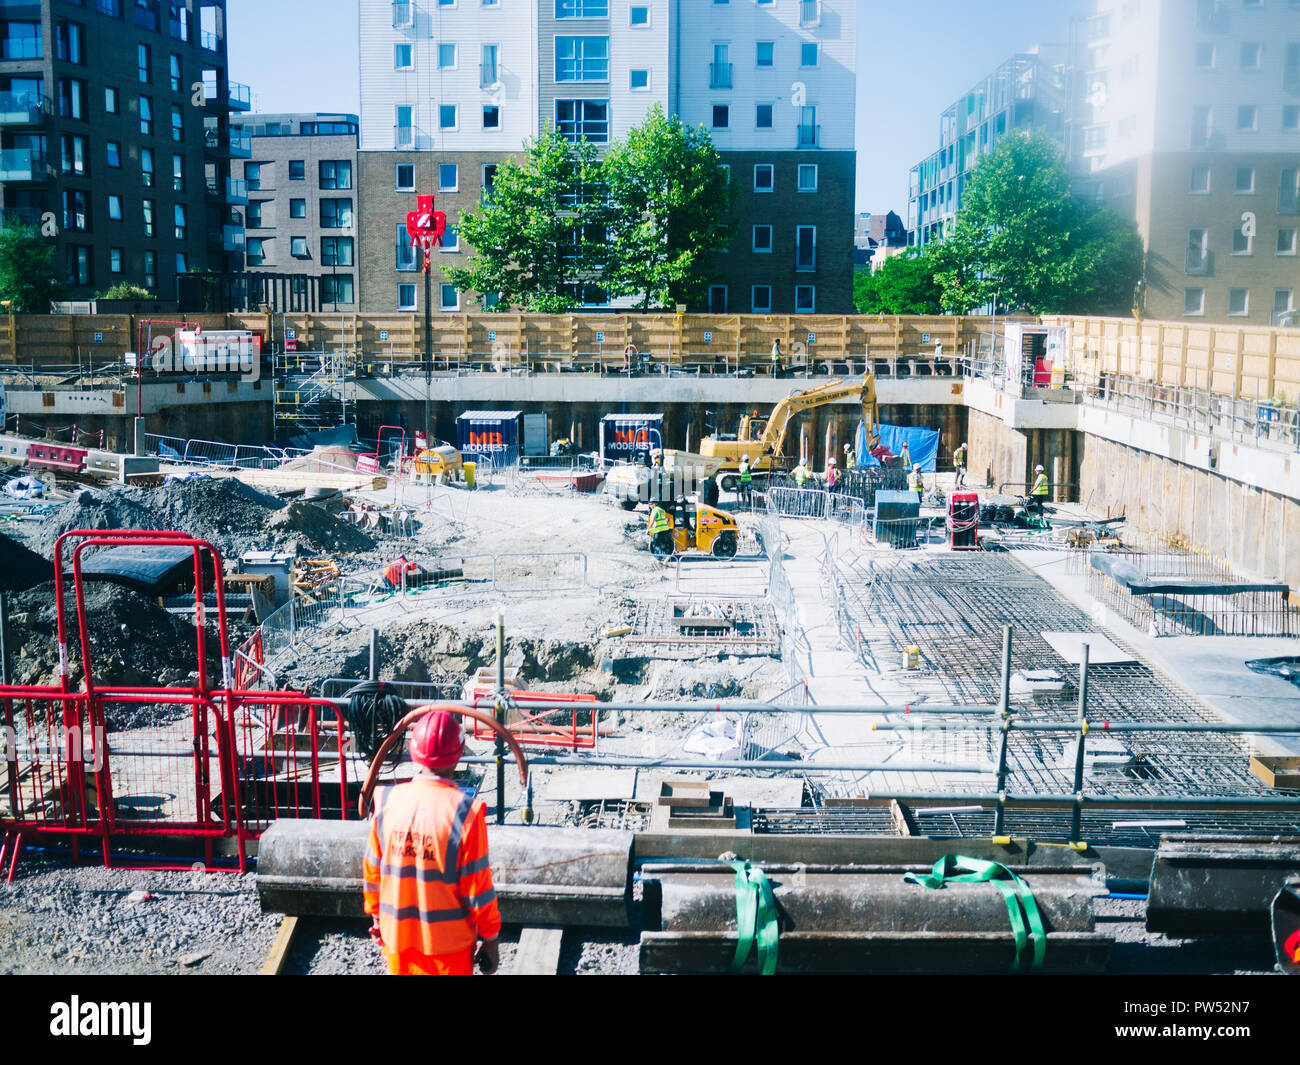 Worker glancing over a building site Stock Photo